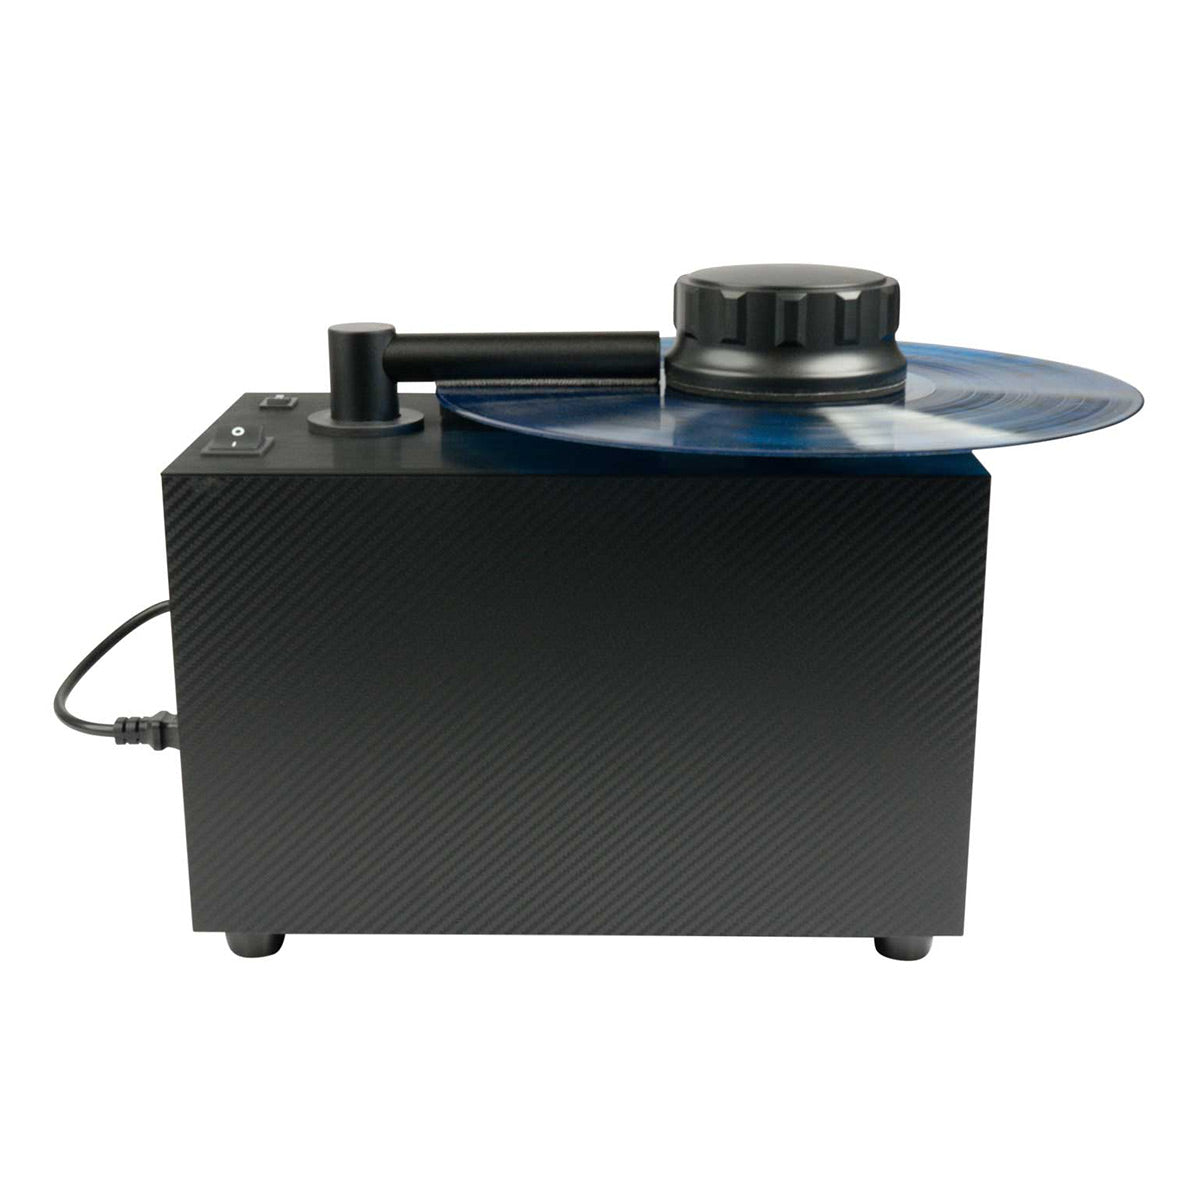 Record Doctor X Record Cleaning Machine (Carbon Fiber)